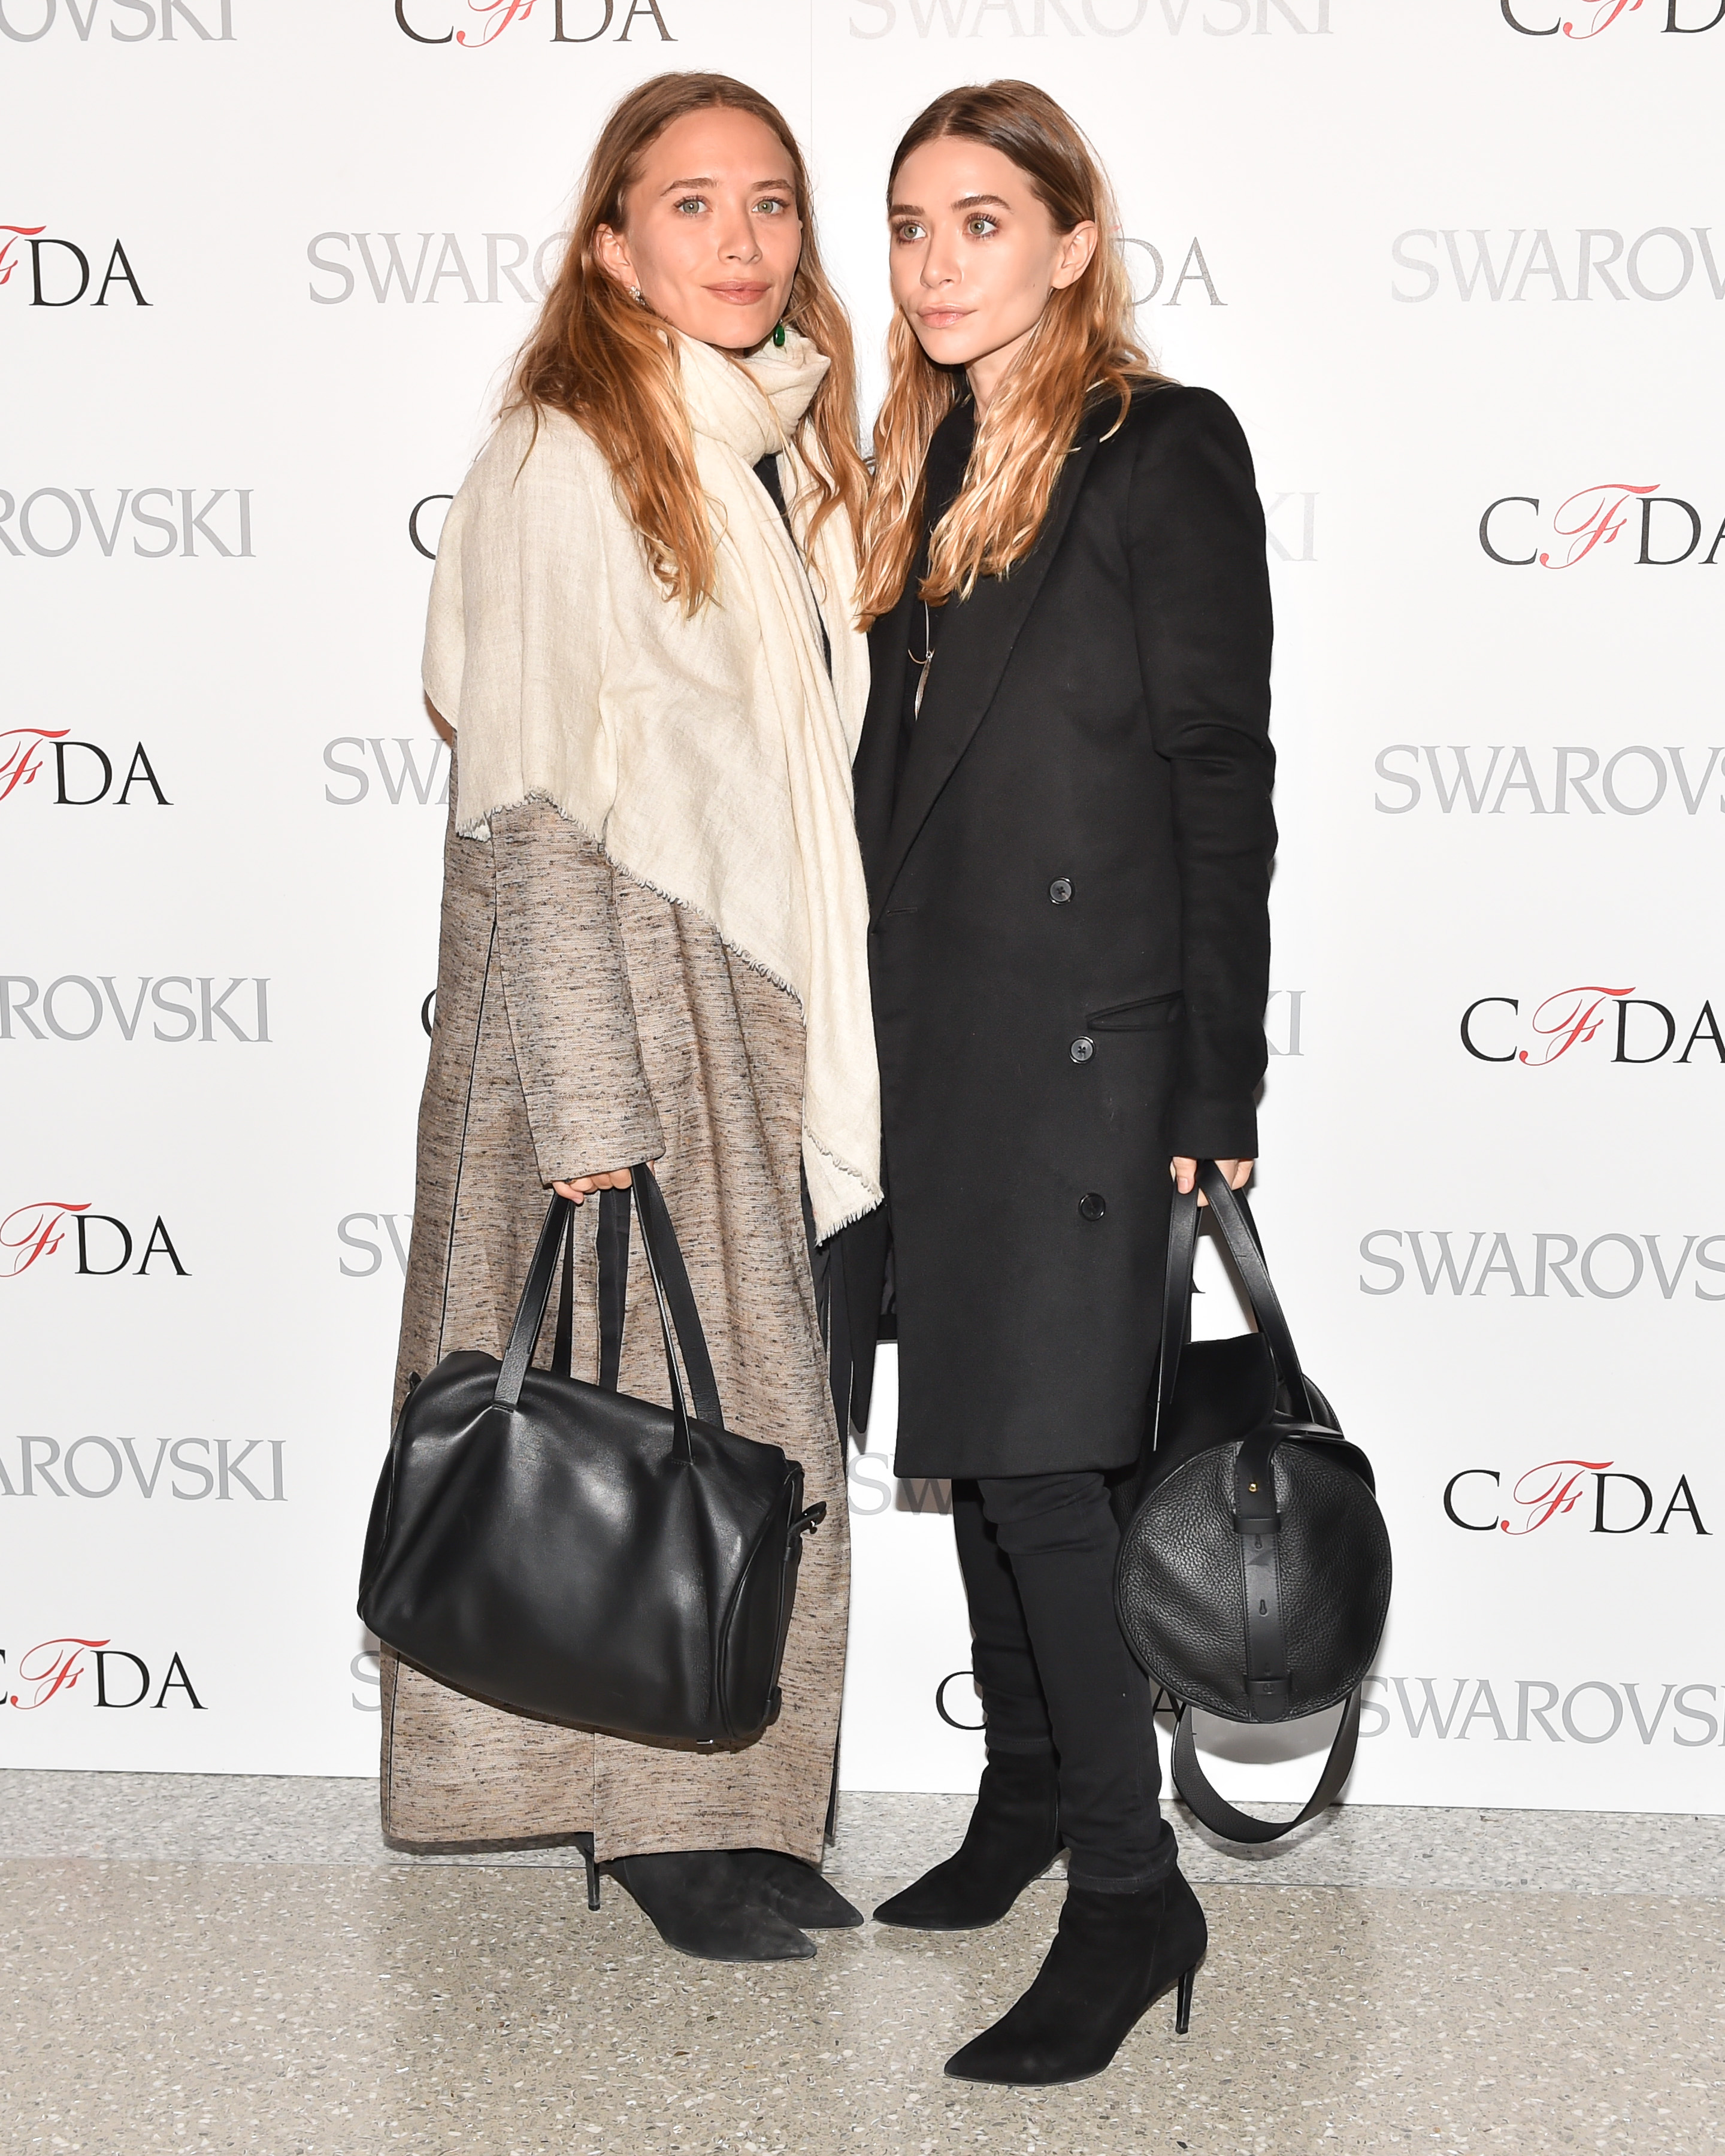 Mary-Kate Olsen (L) and Ashley Olsen attend 2015 CFDA Fashion Awards Announcement Party in New York City on March 16, 2015.